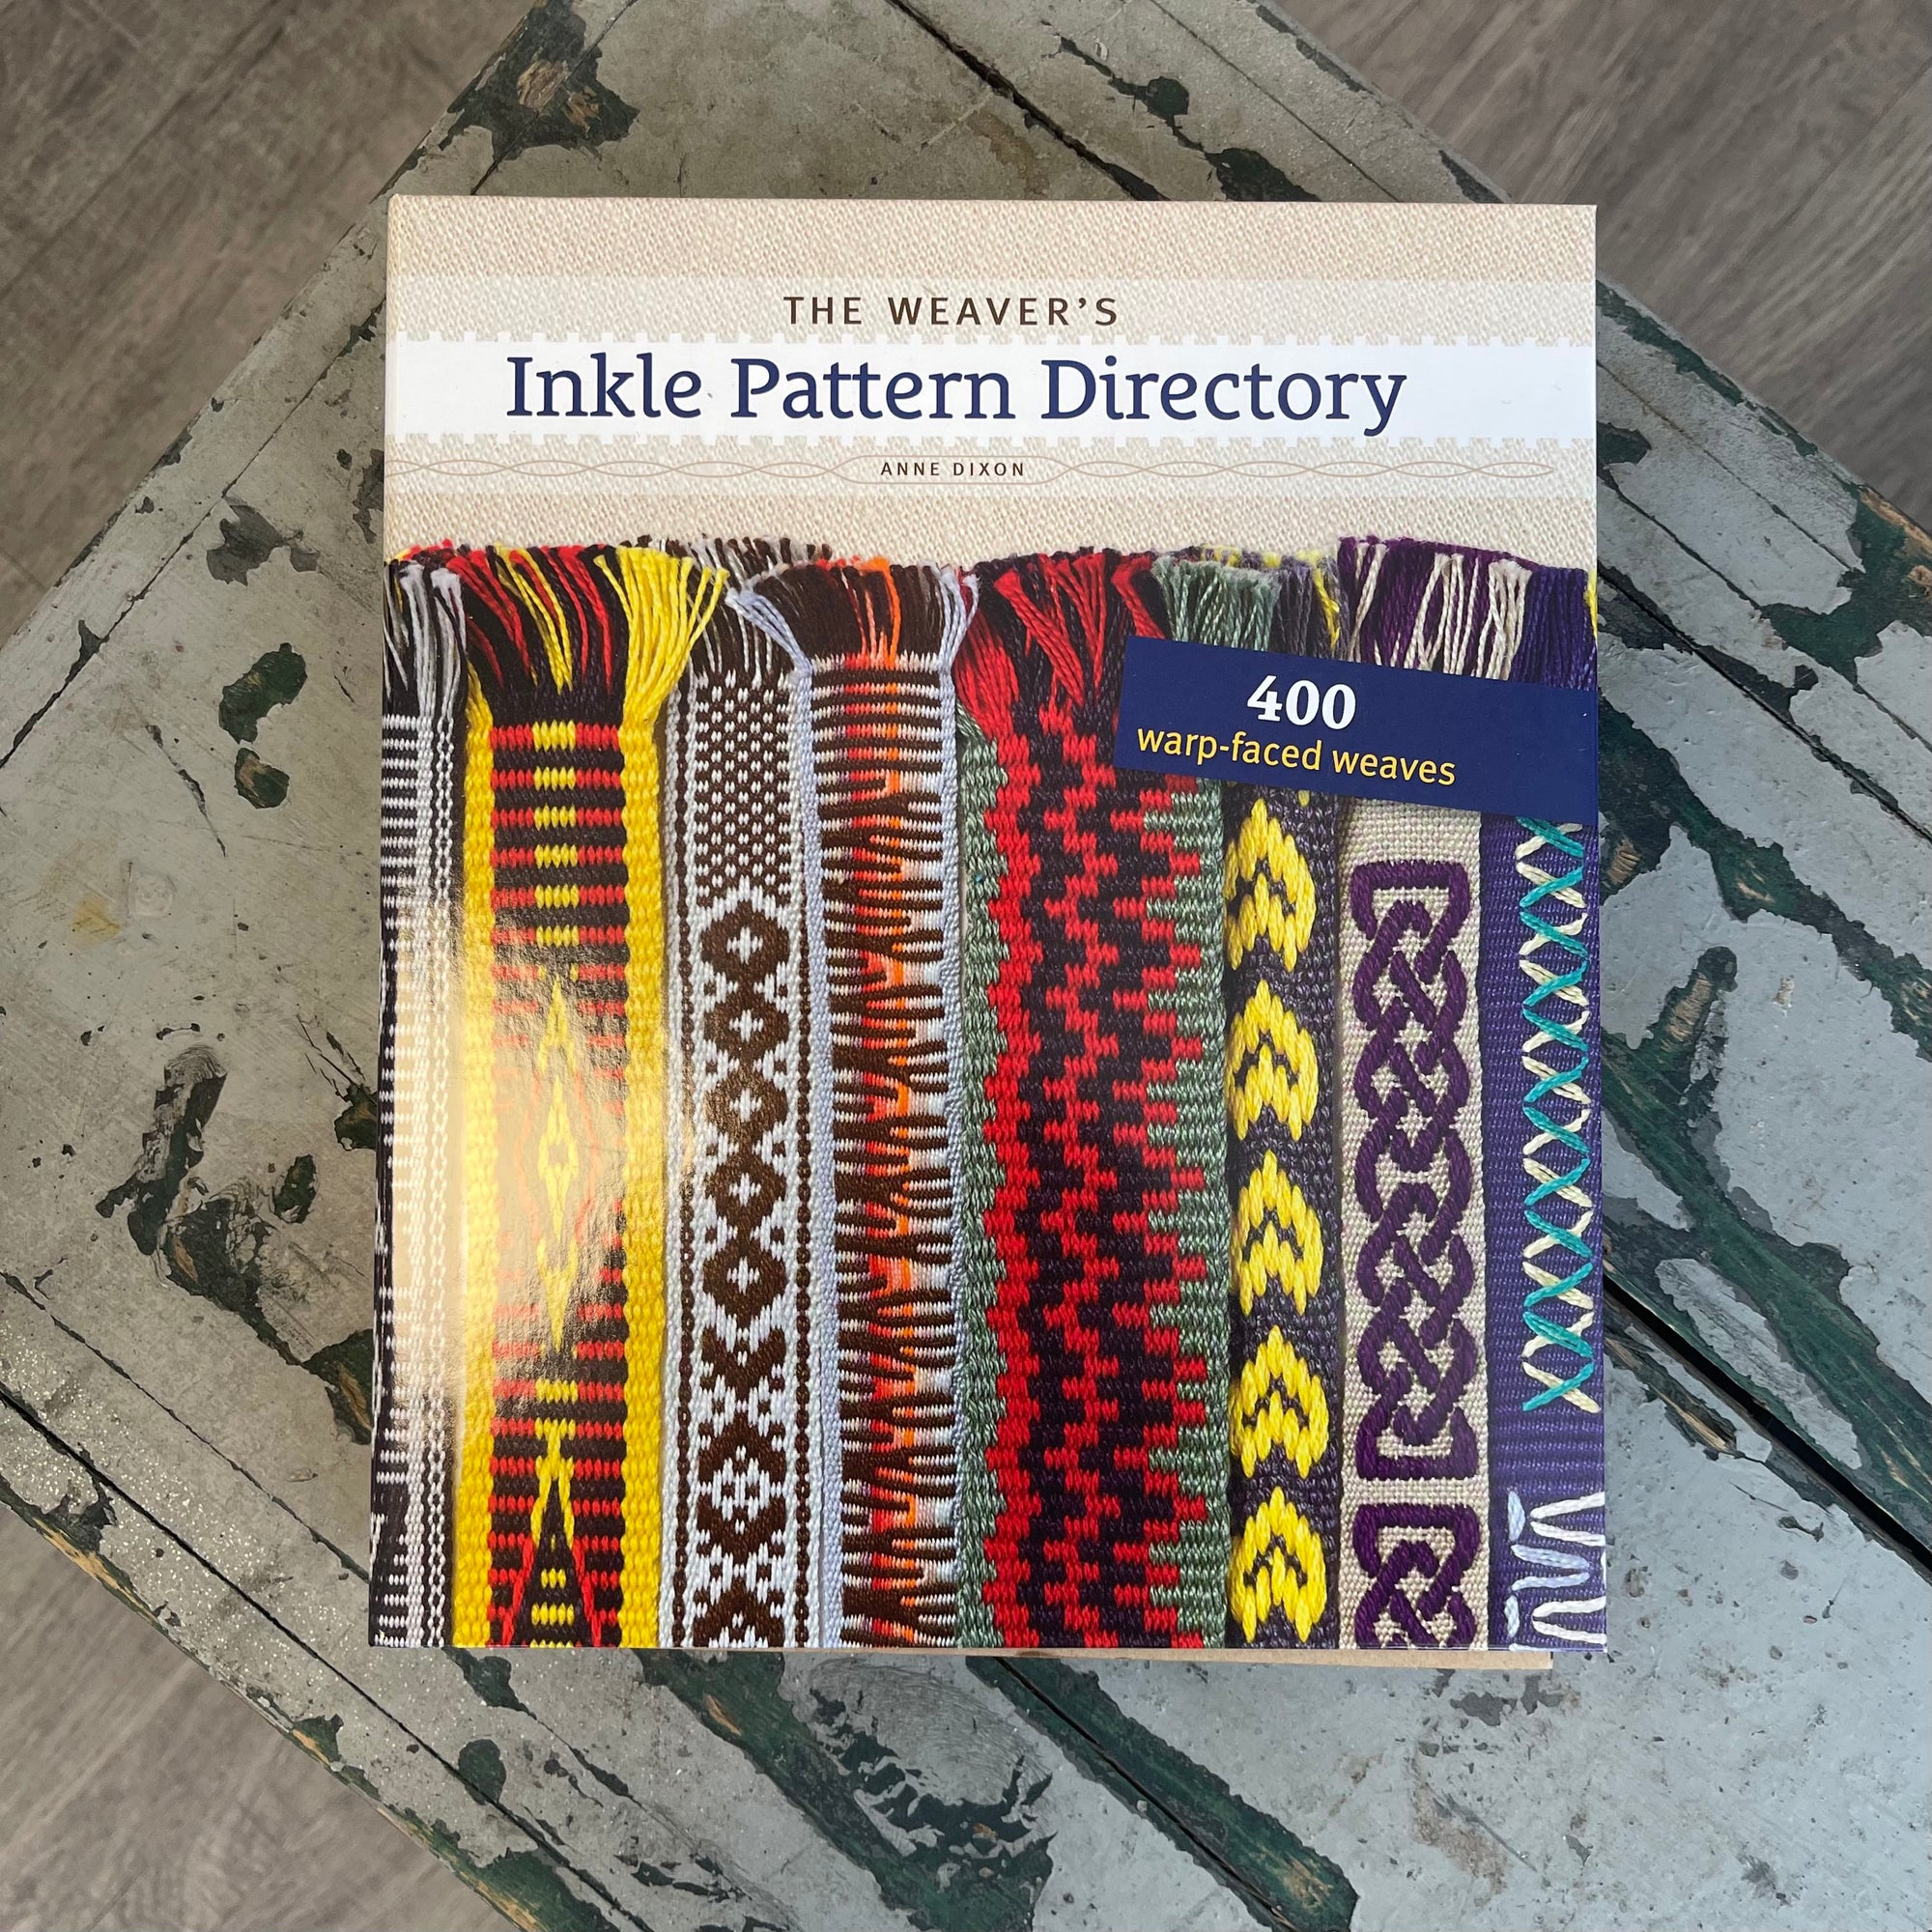 The Weaver's Inkle Pattern Directory: 400 Warp-Facced Weaves by Anne Dixon